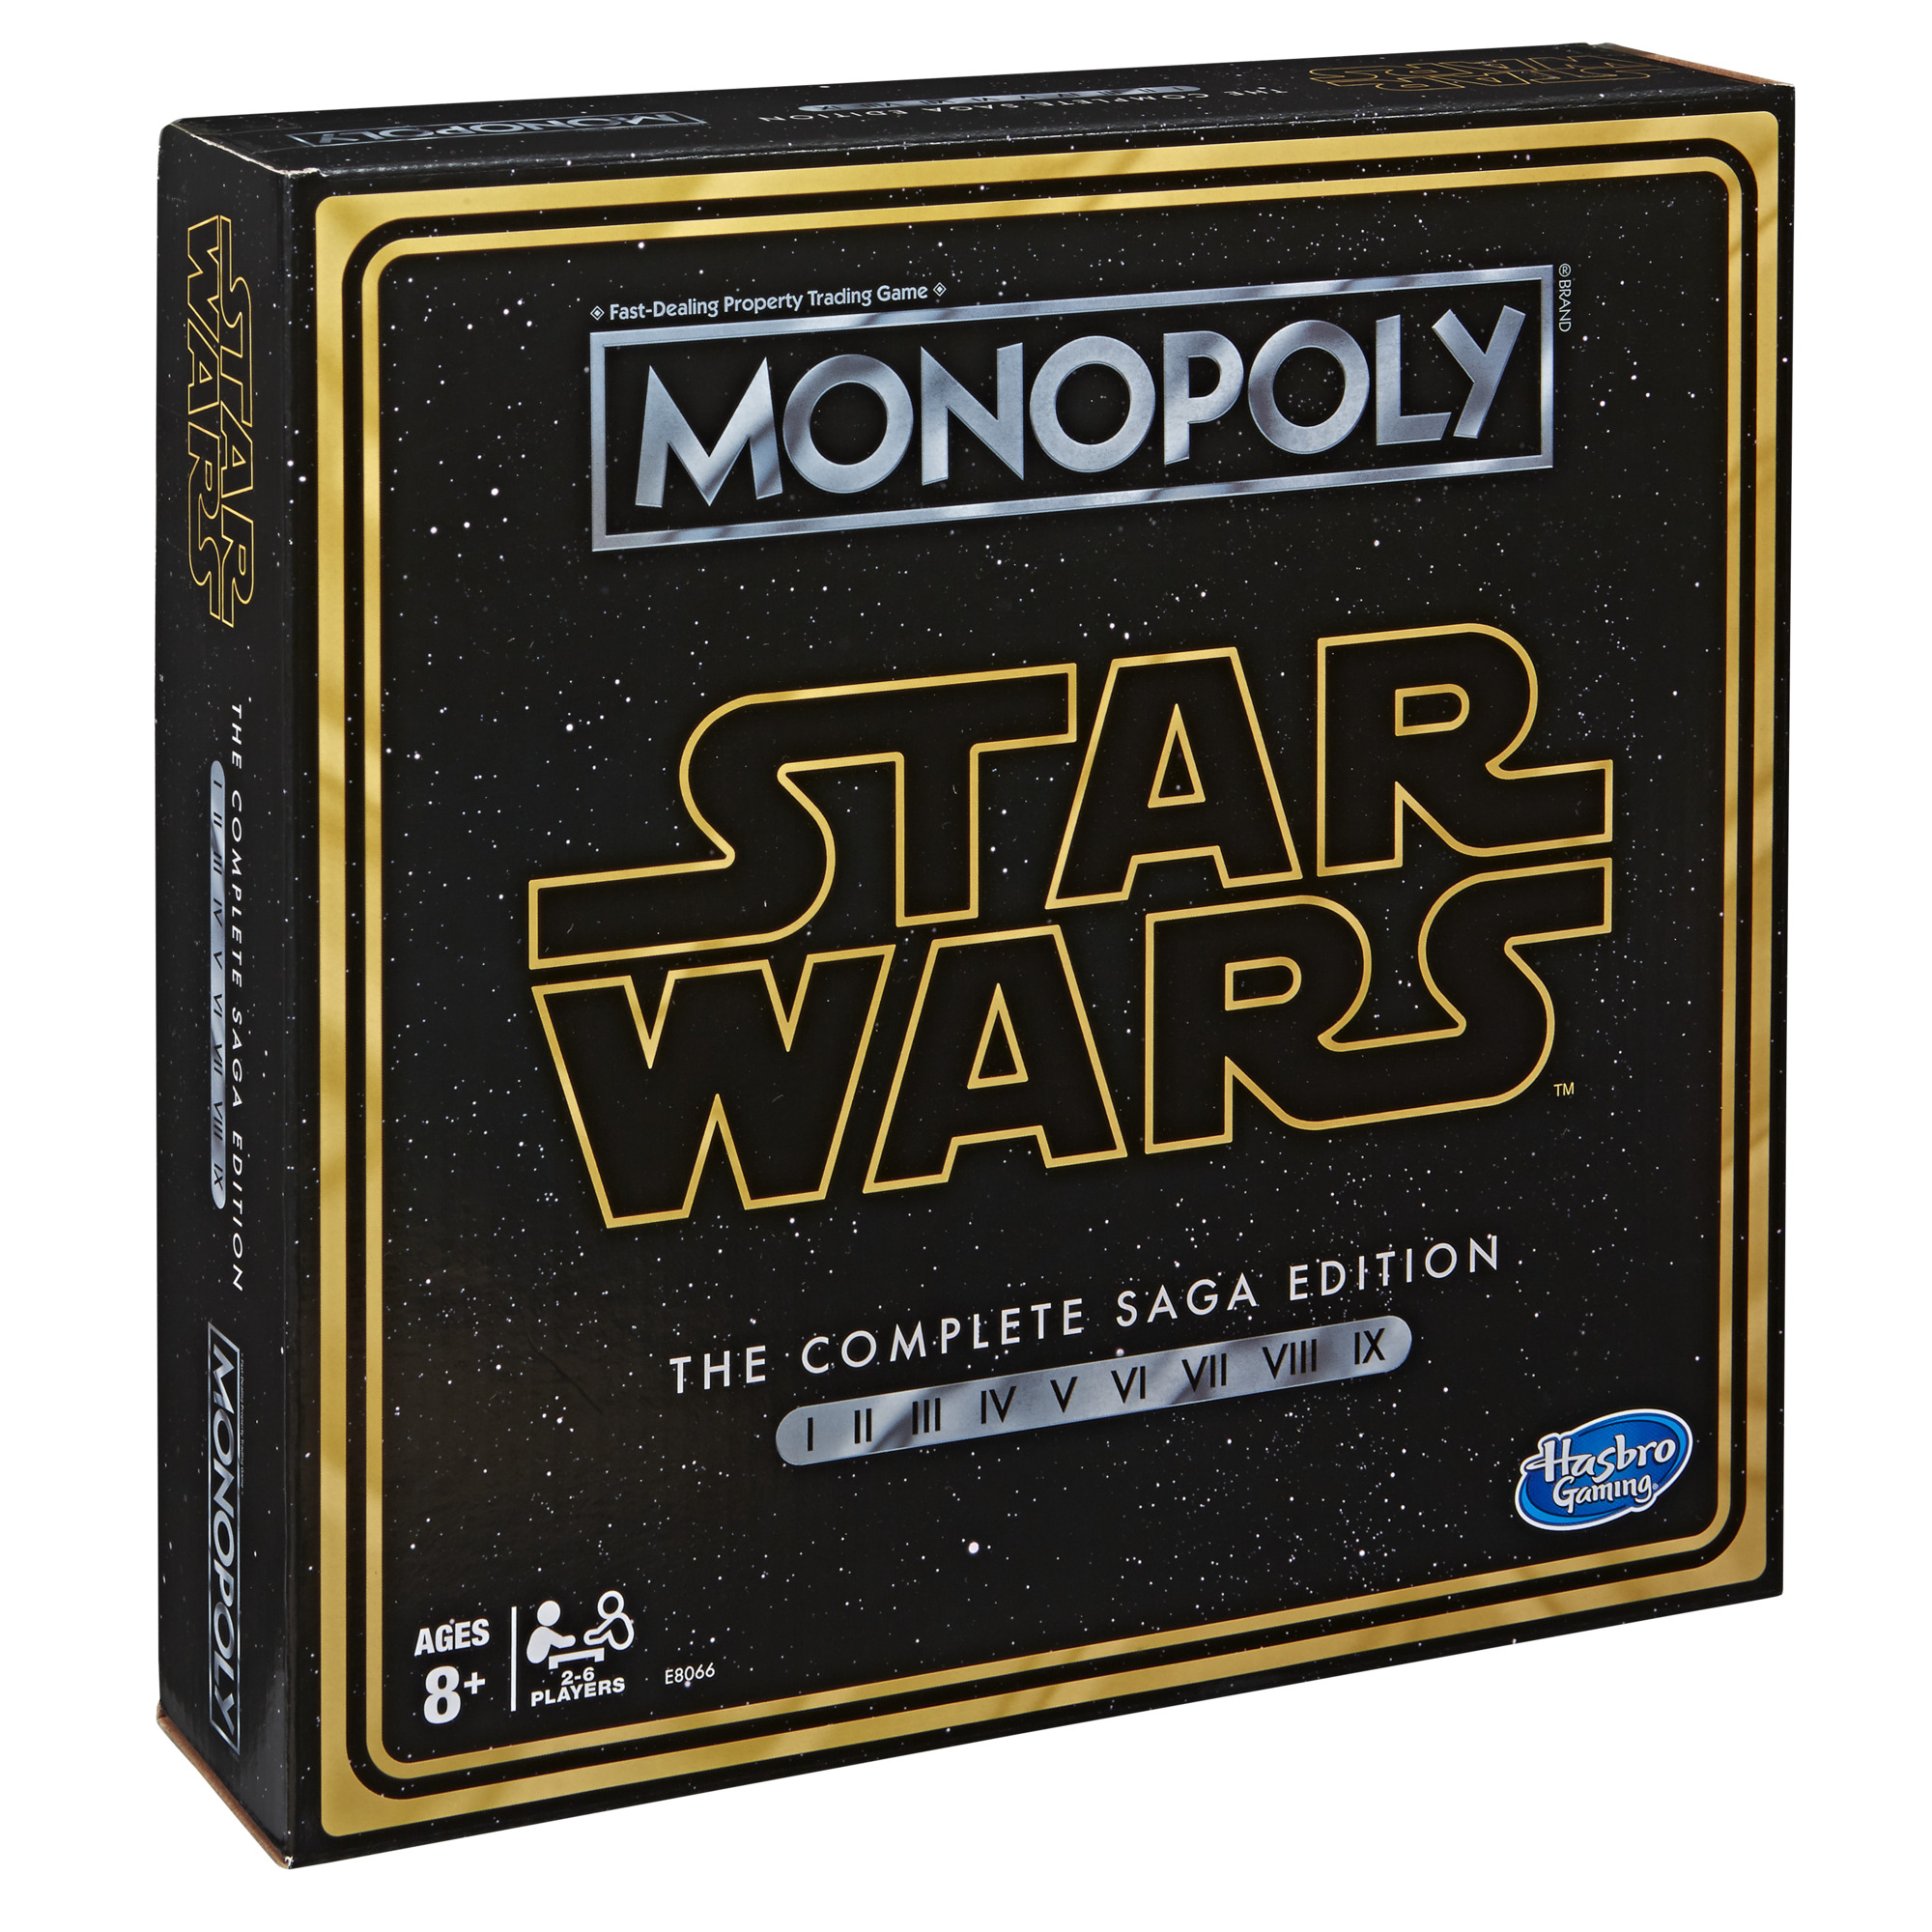 Monopoly: Star Wars The Complete Saga Edition Board Game for Kids - image 1 of 7